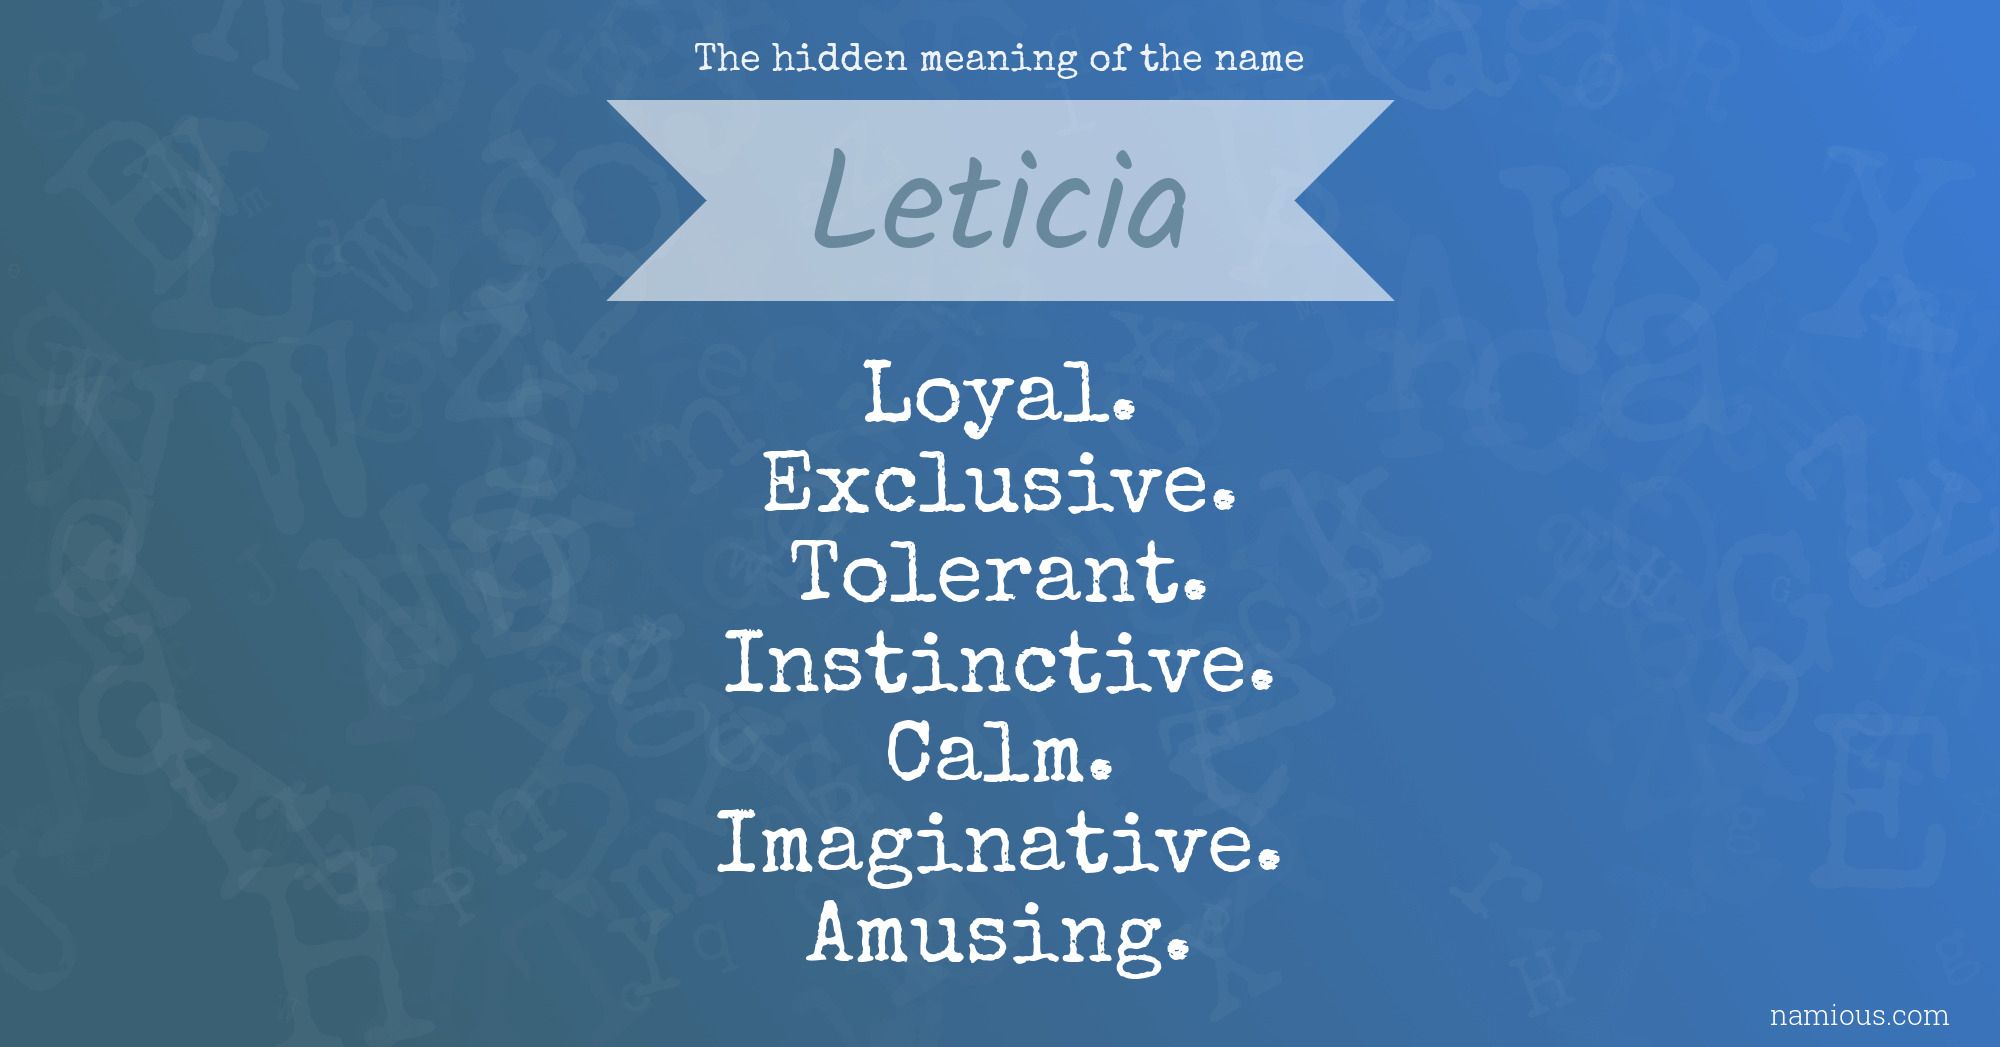 The hidden meaning of the name Leticia